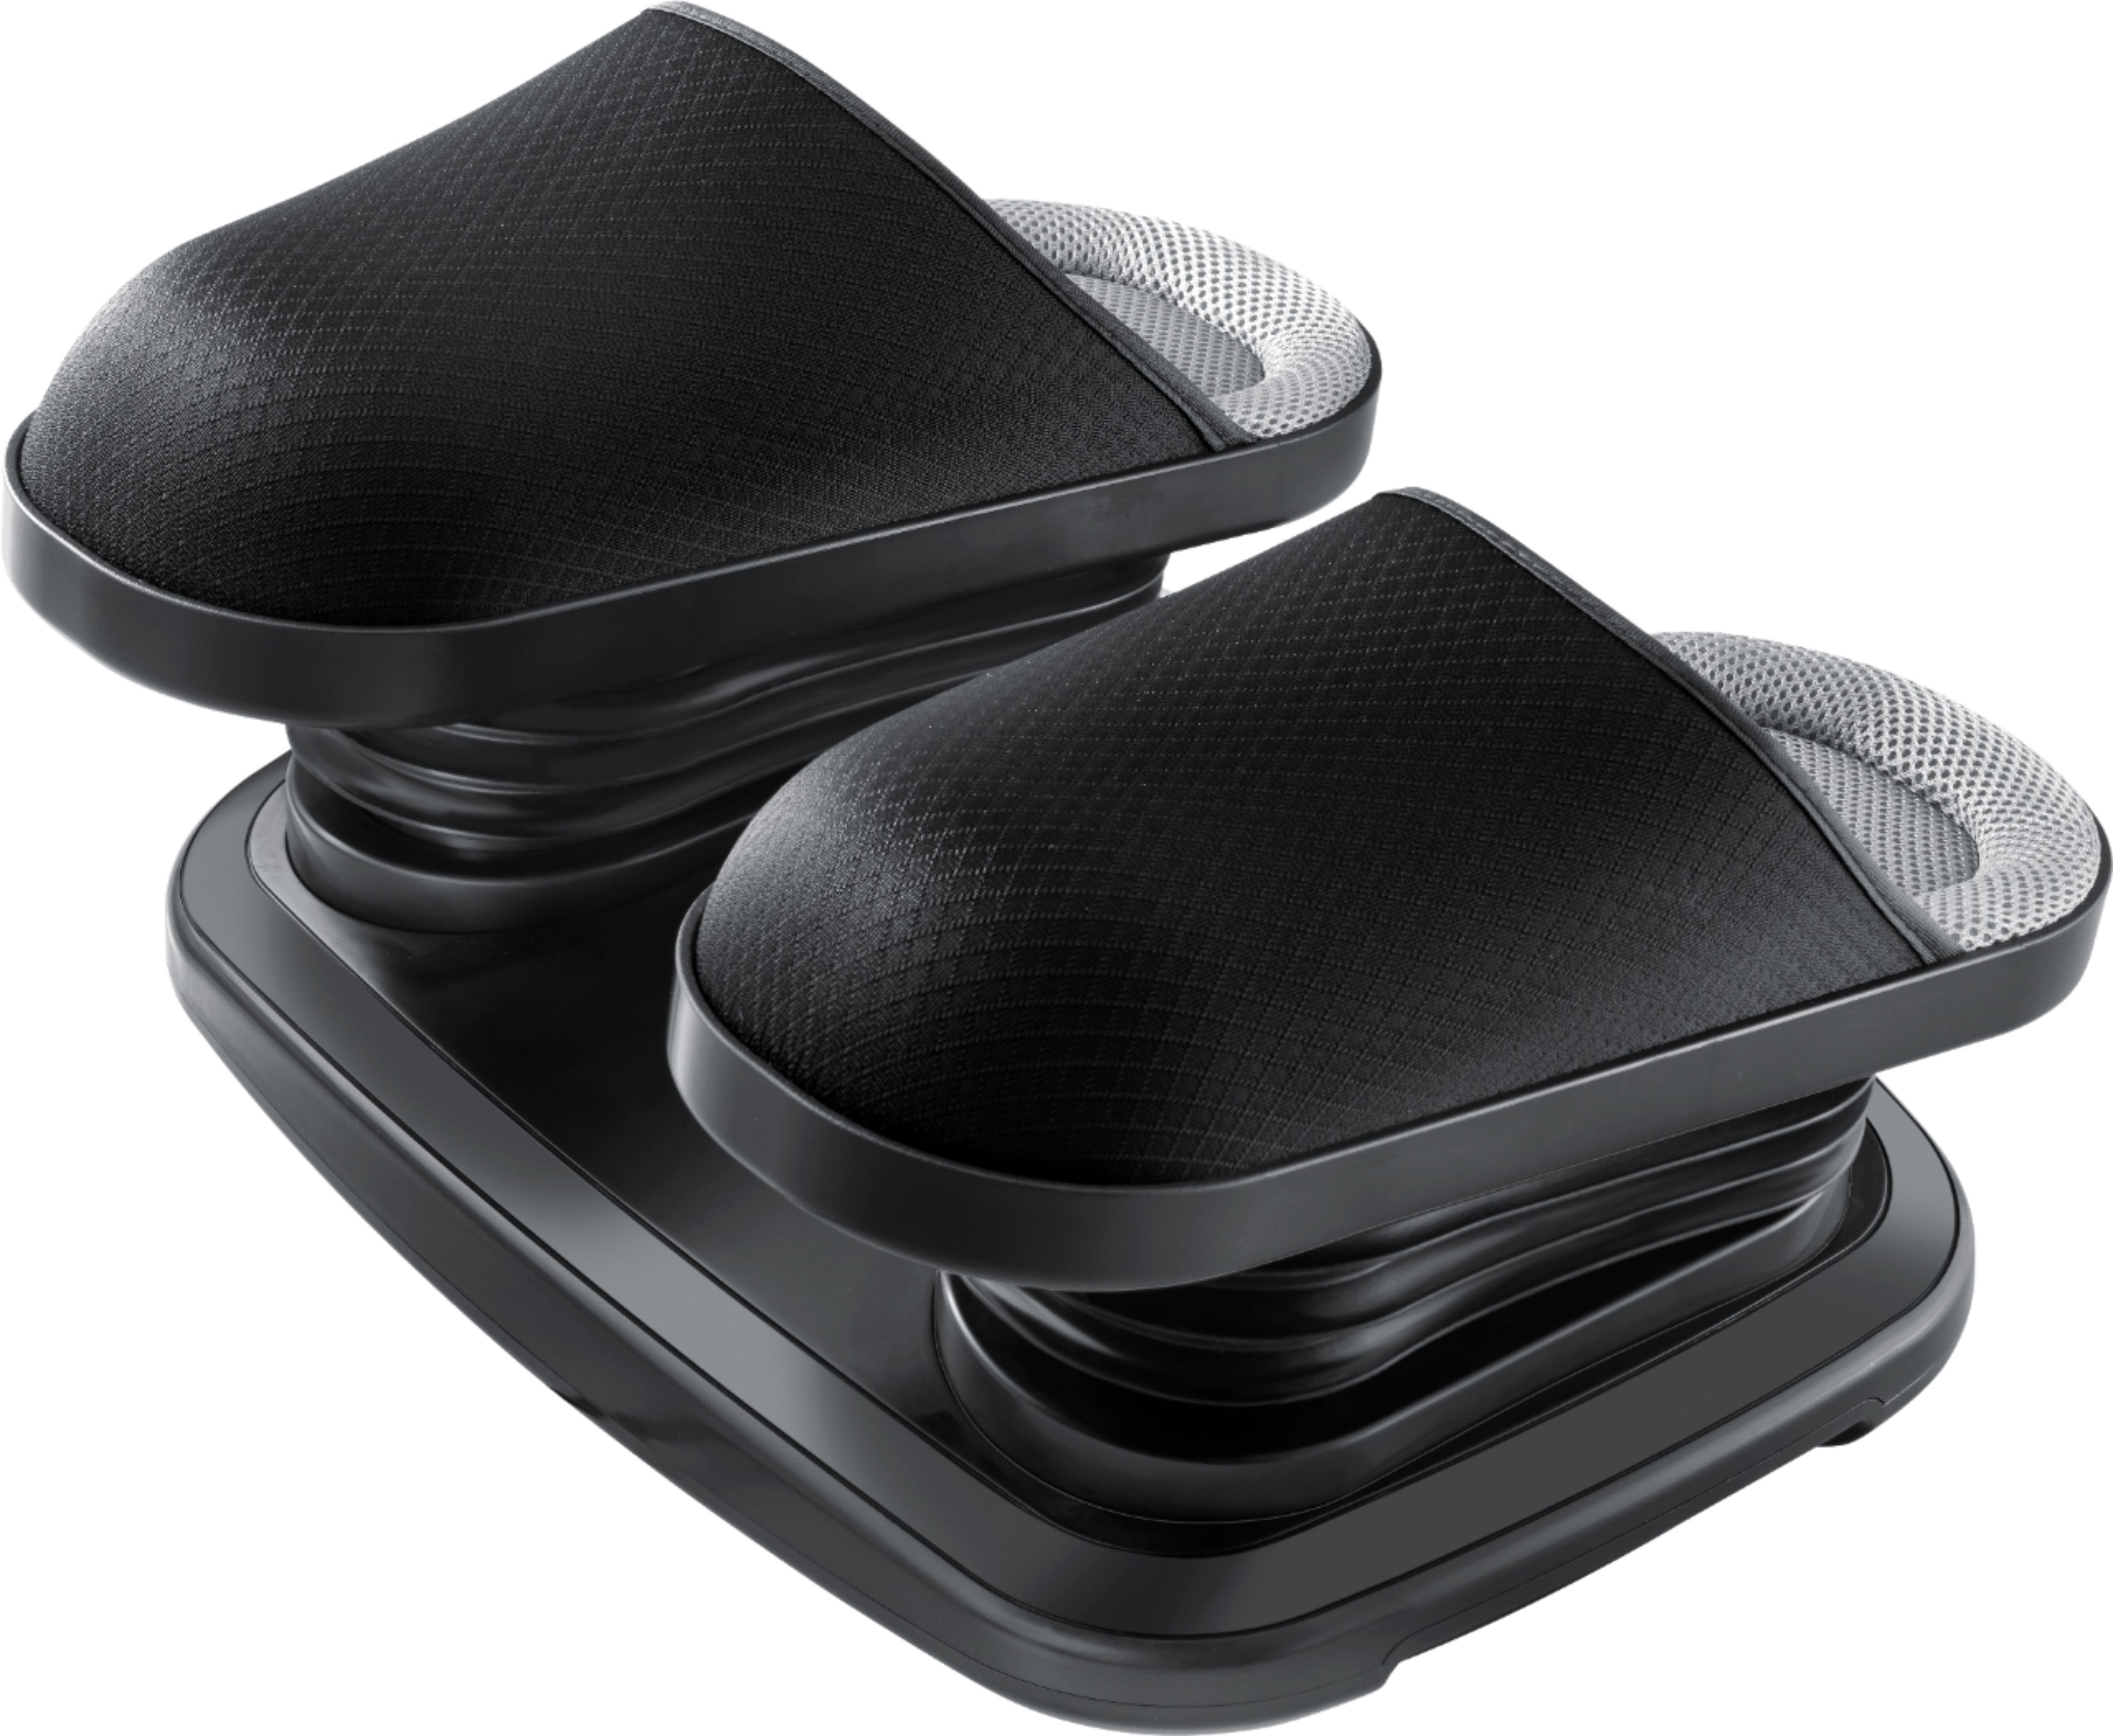 Angle View: HoMedics - Ankle and Foot Massager with Heat - Black